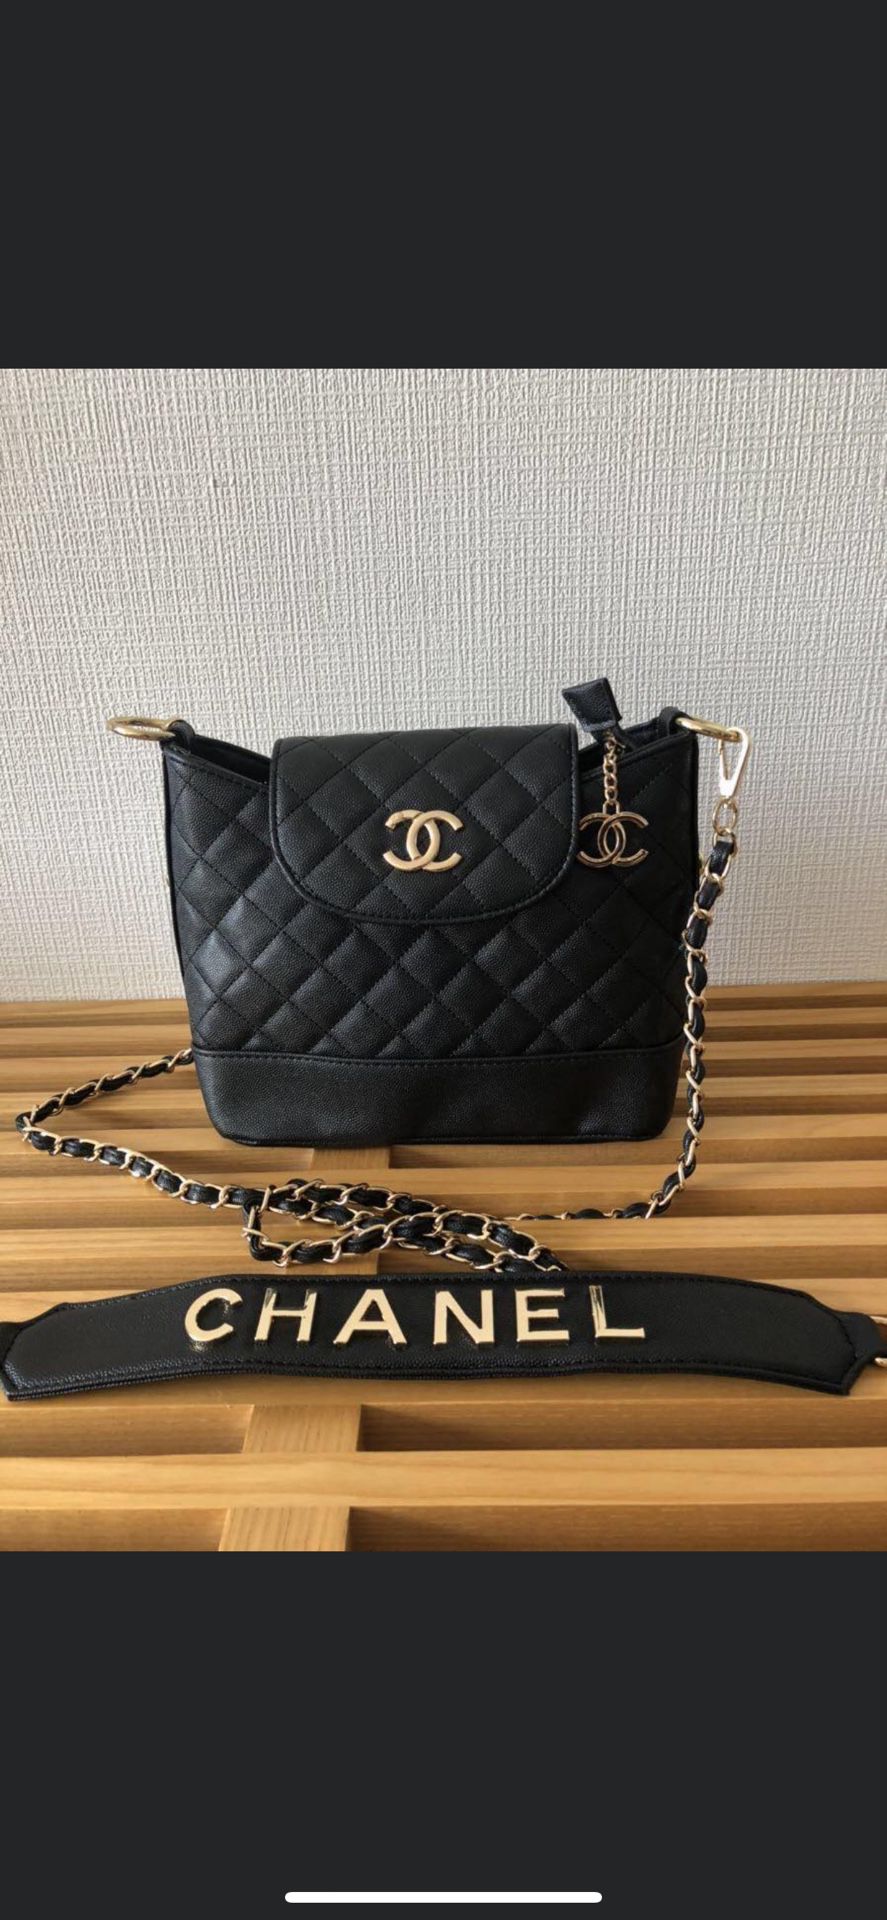 Chanel VIP Two-way Leather Bag